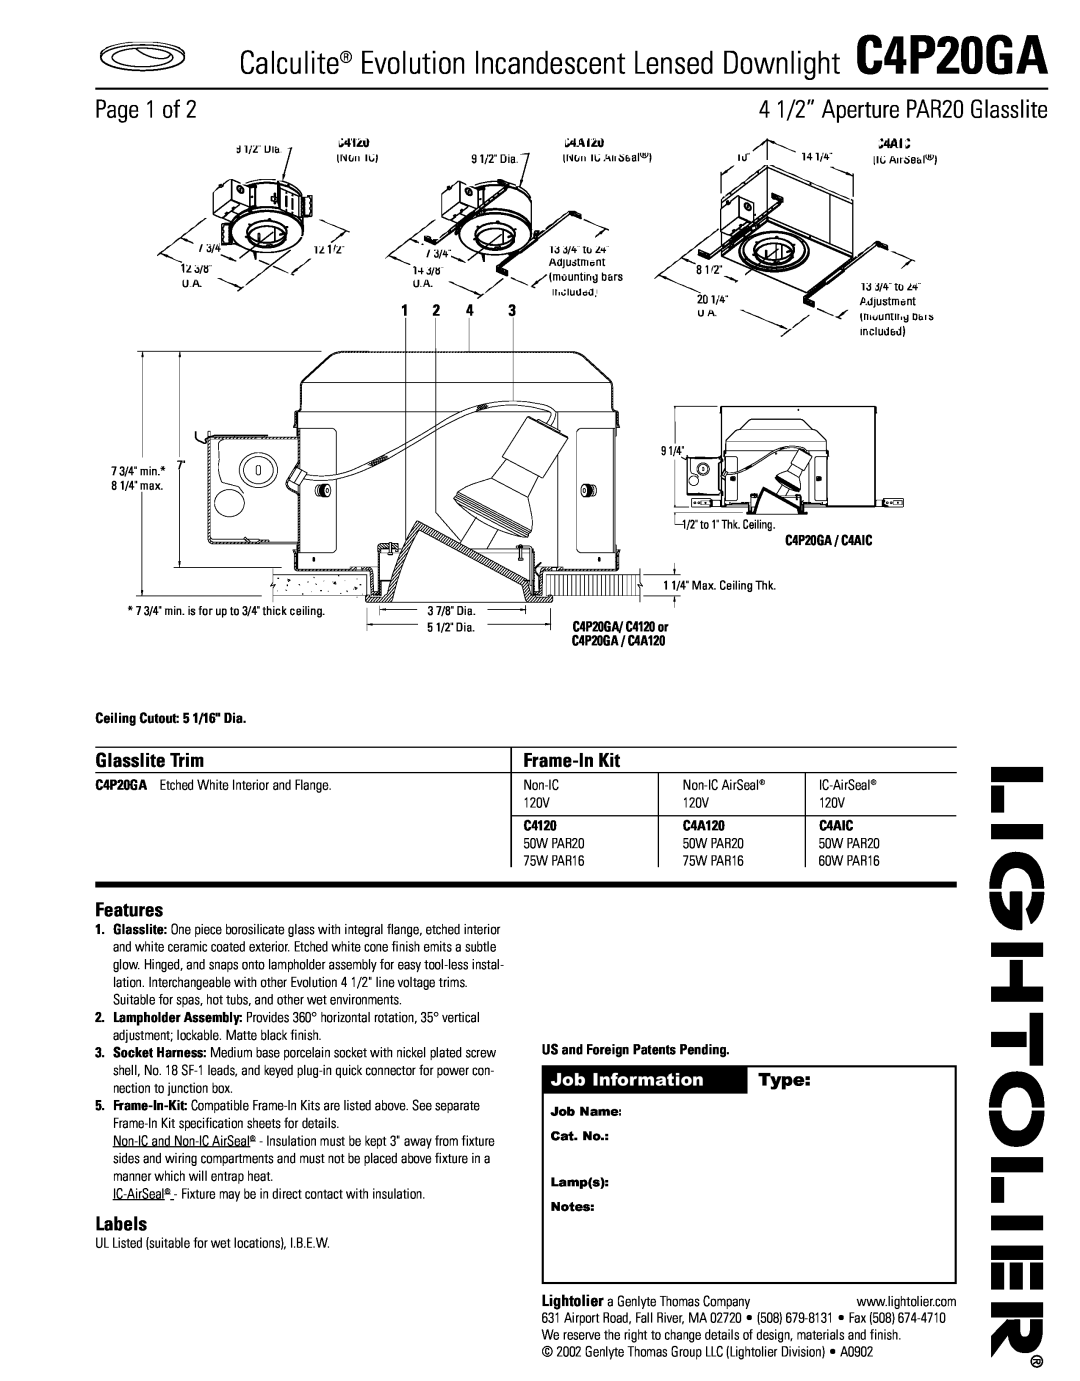 Lightolier C4P20GA specifications Page 1 of, Glasslite Trim, Frame-InKit, Features, Labels, Job Information, Type, C4120 